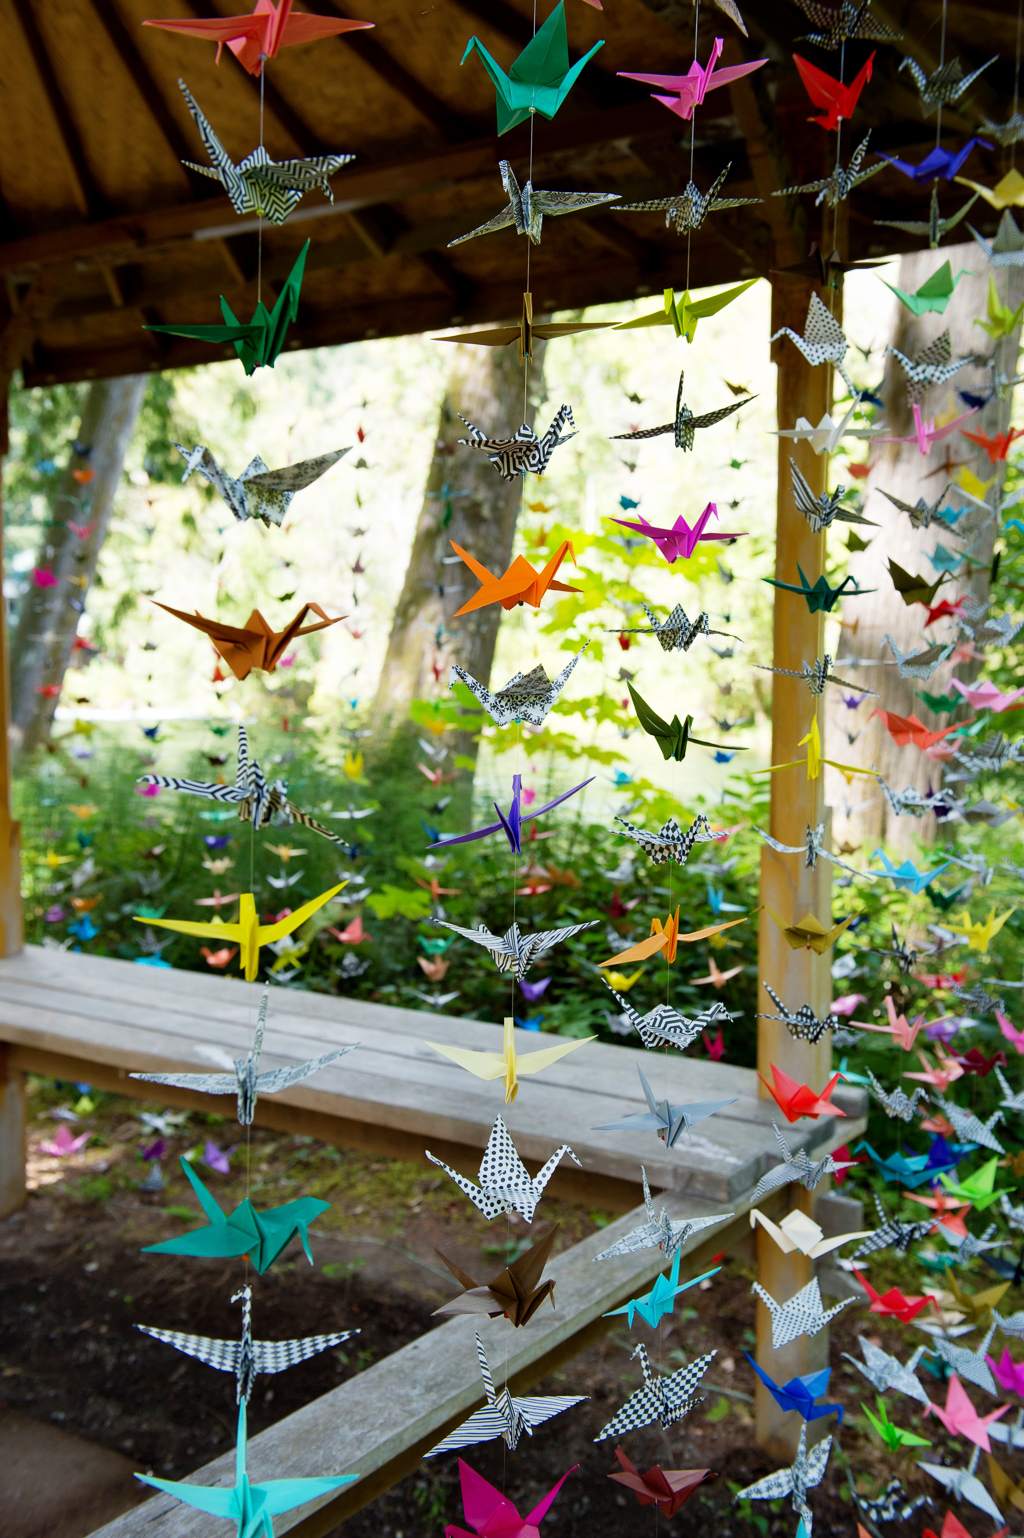 colorful paper origami cranes hang from string on a gazebo for the wedding ceremony arbor